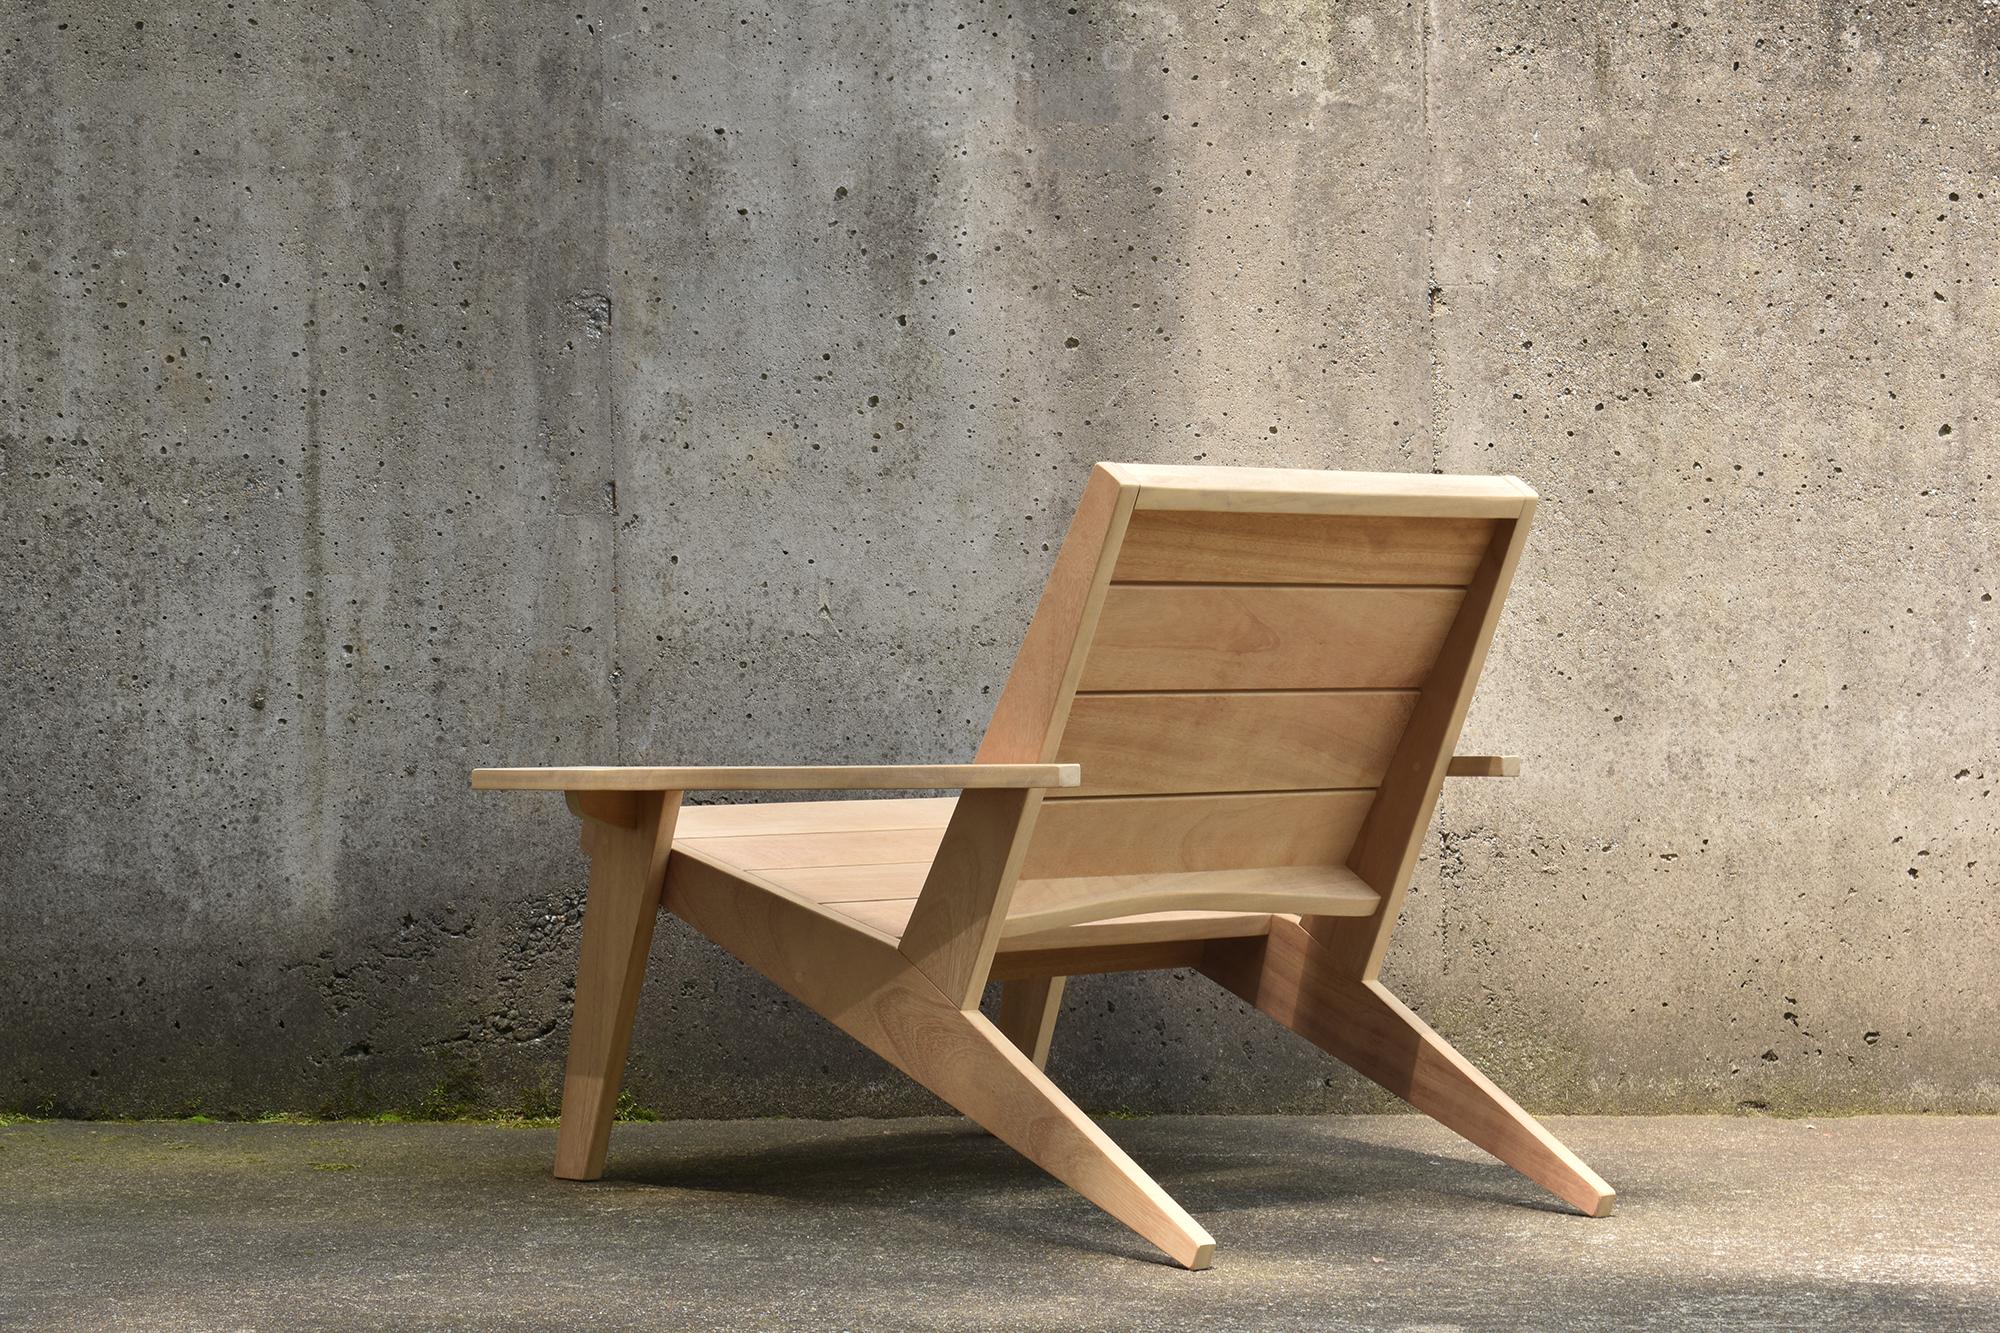 Modern outdoor rocking chair designed for traditional/transitional and modern/contemporary outdoor decks, patio, porches, and poolsides. 

Built using mortise and tenon joinery, this chair is designed to age gracefully even in the most demanding